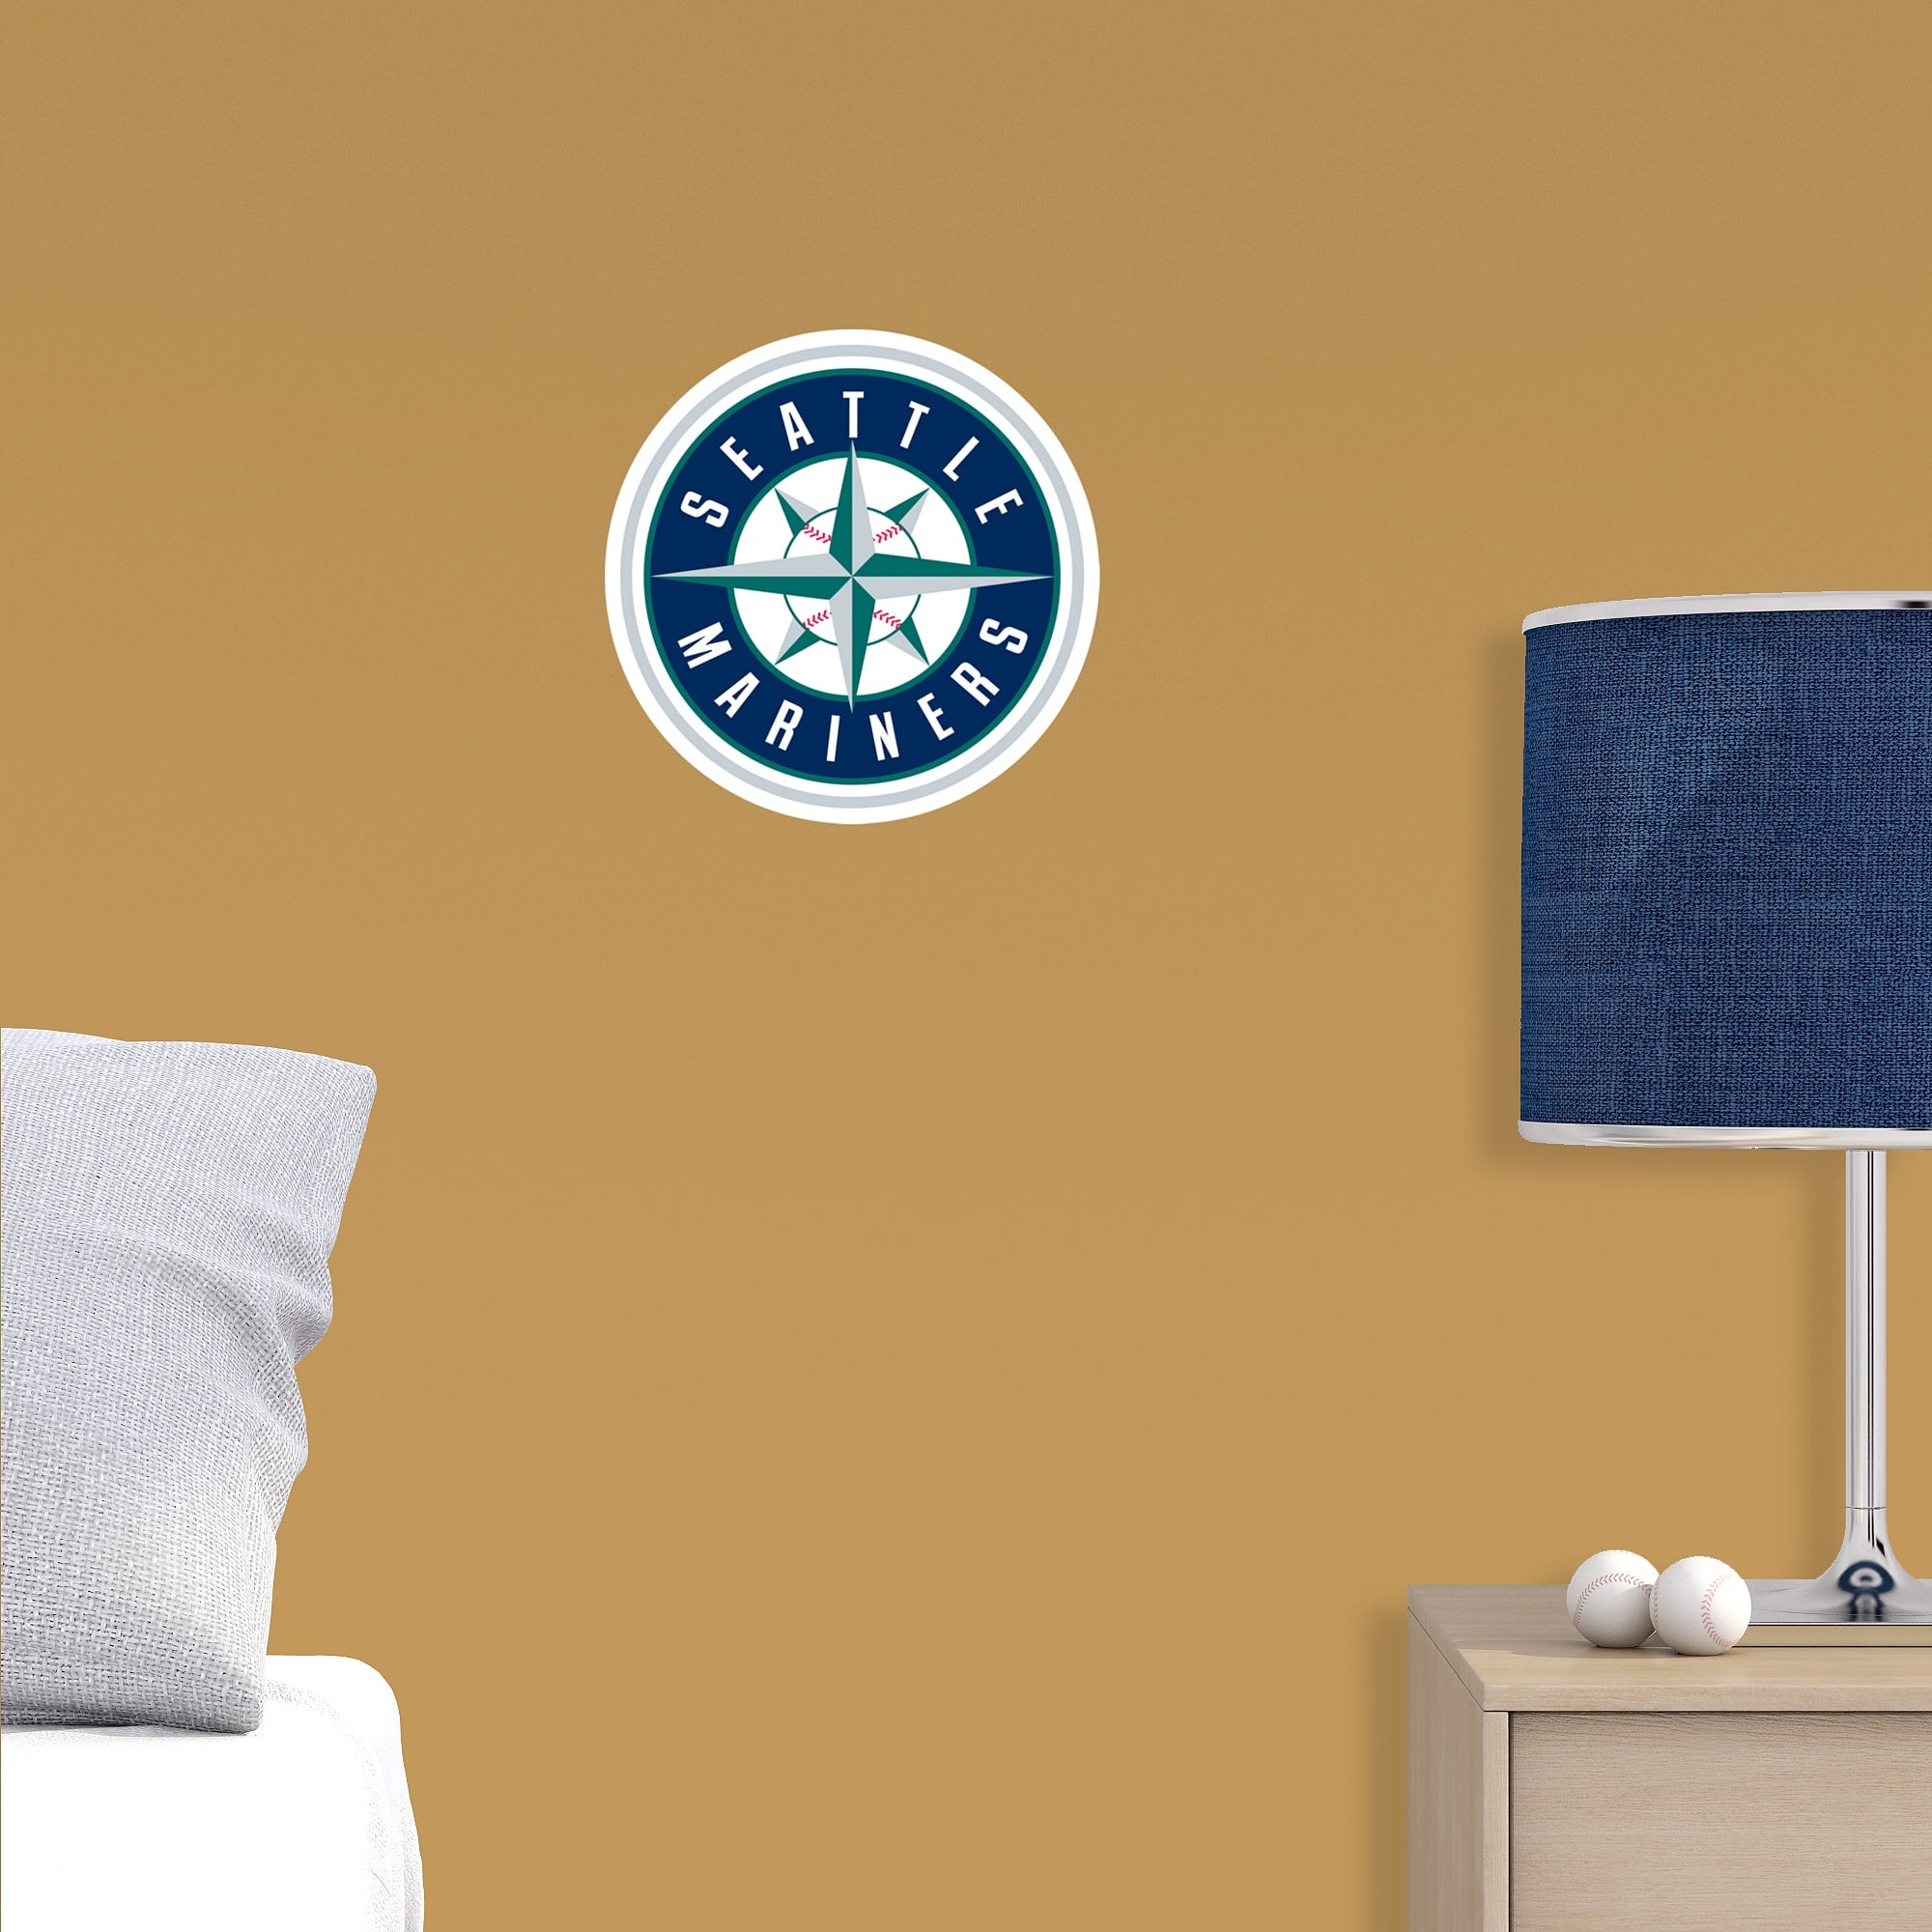 Seattle Mariners: Logo - Officially Licensed MLB Removable Wall Decal Large by Fathead | Vinyl